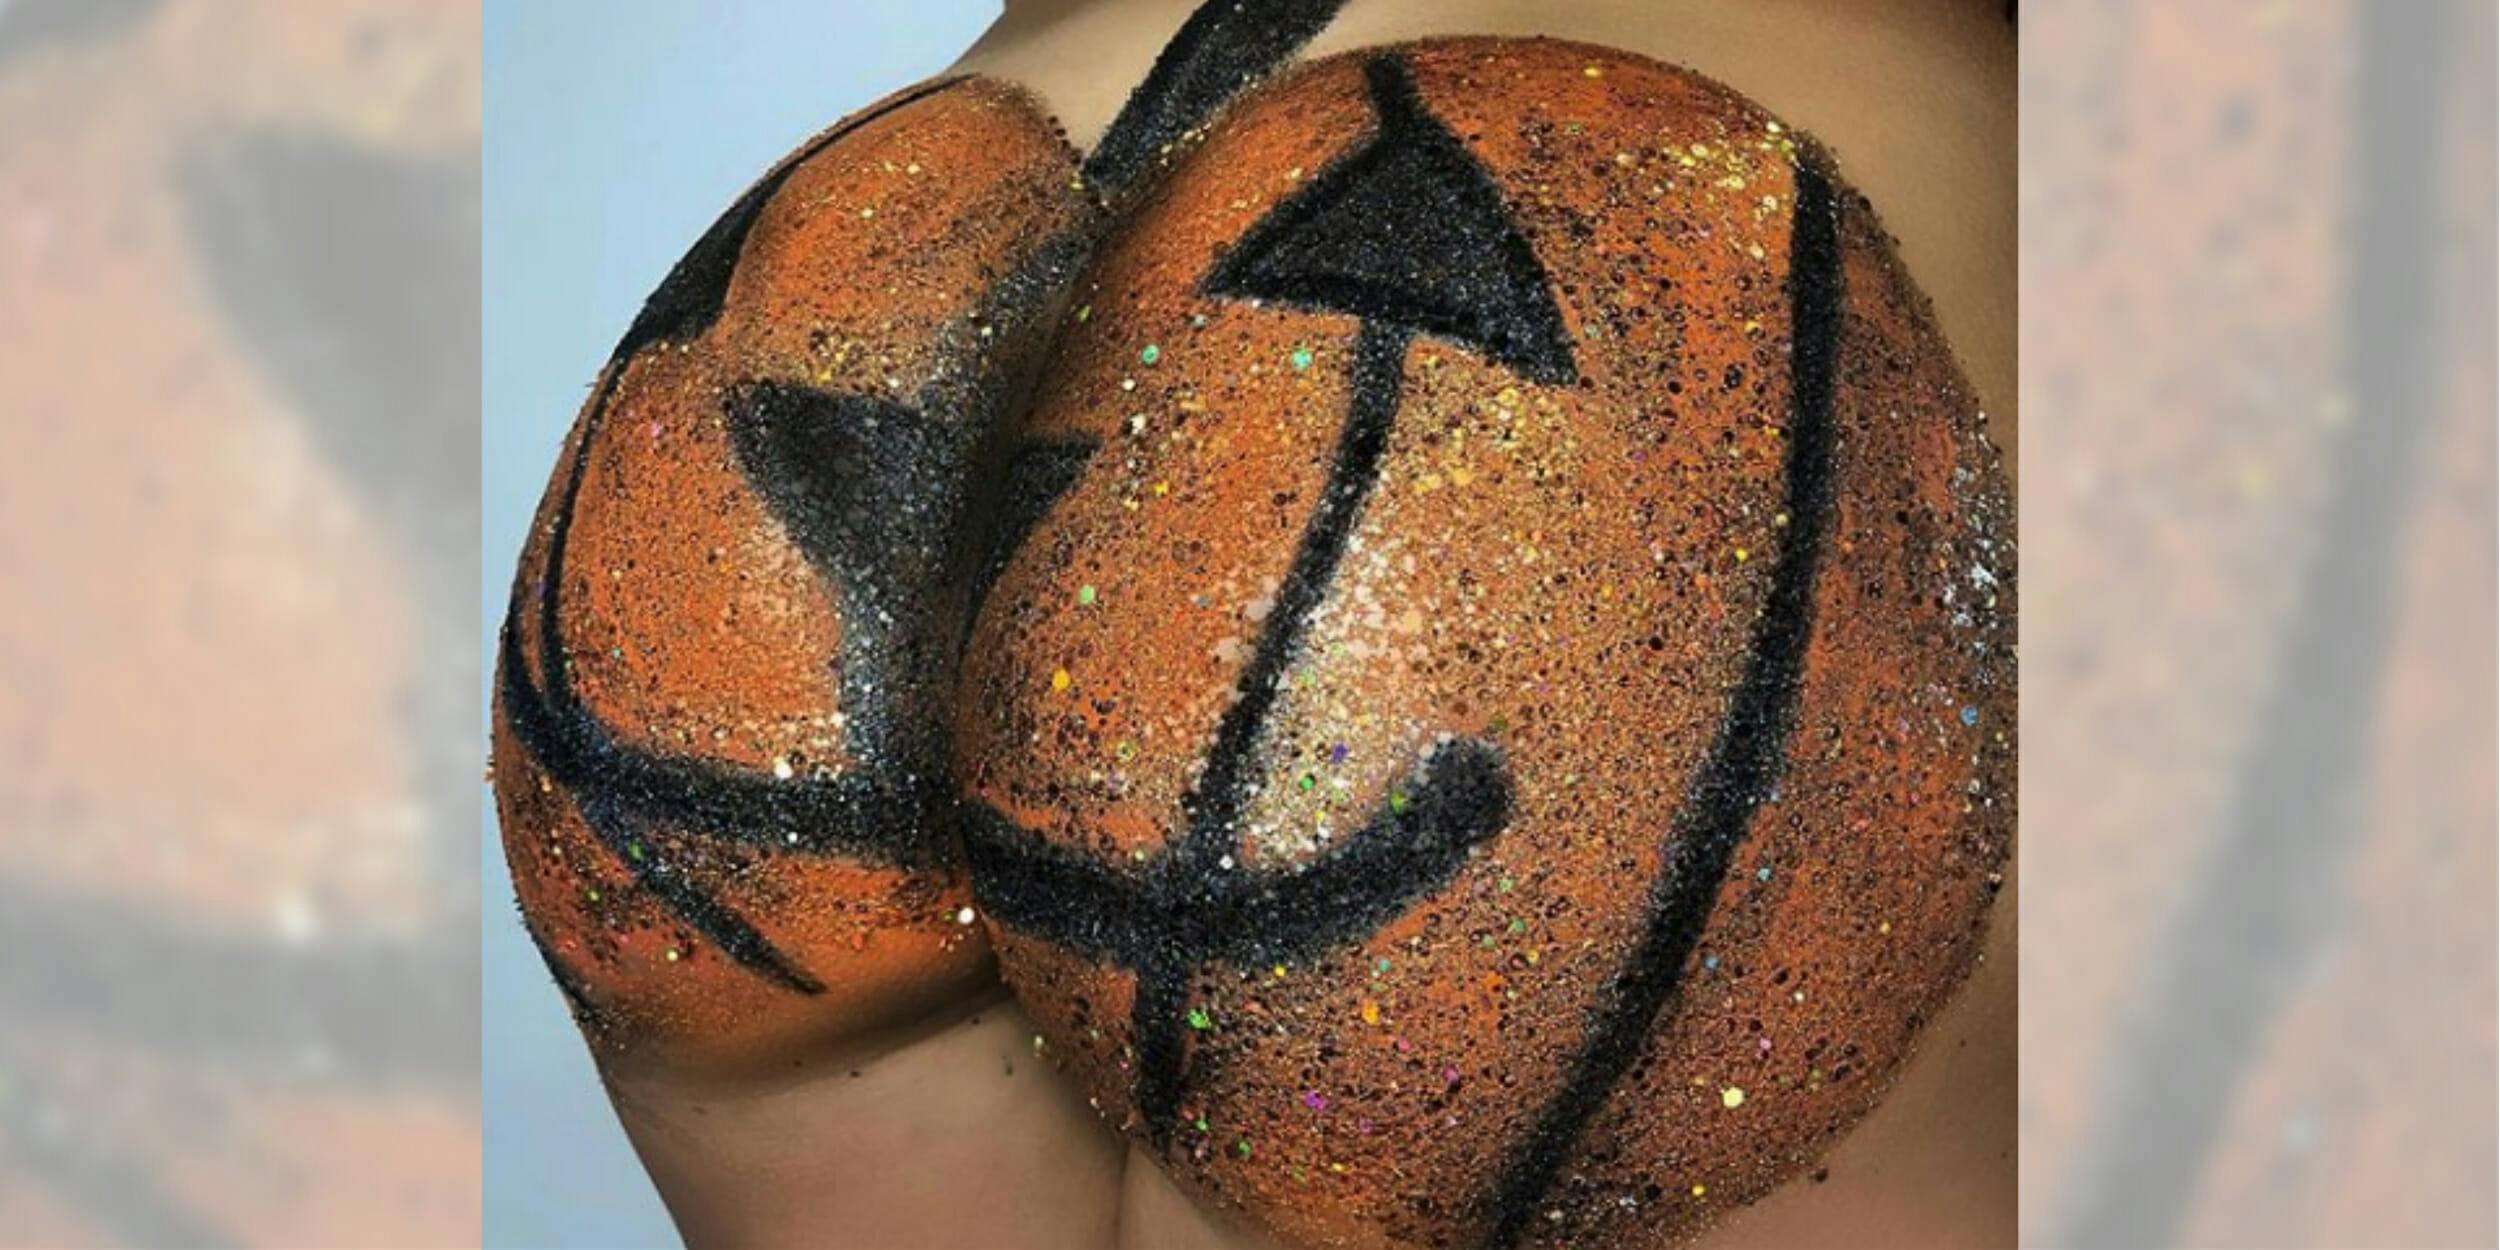 Body glitter gurus on Instagram are painting their butts to look like pumpkins